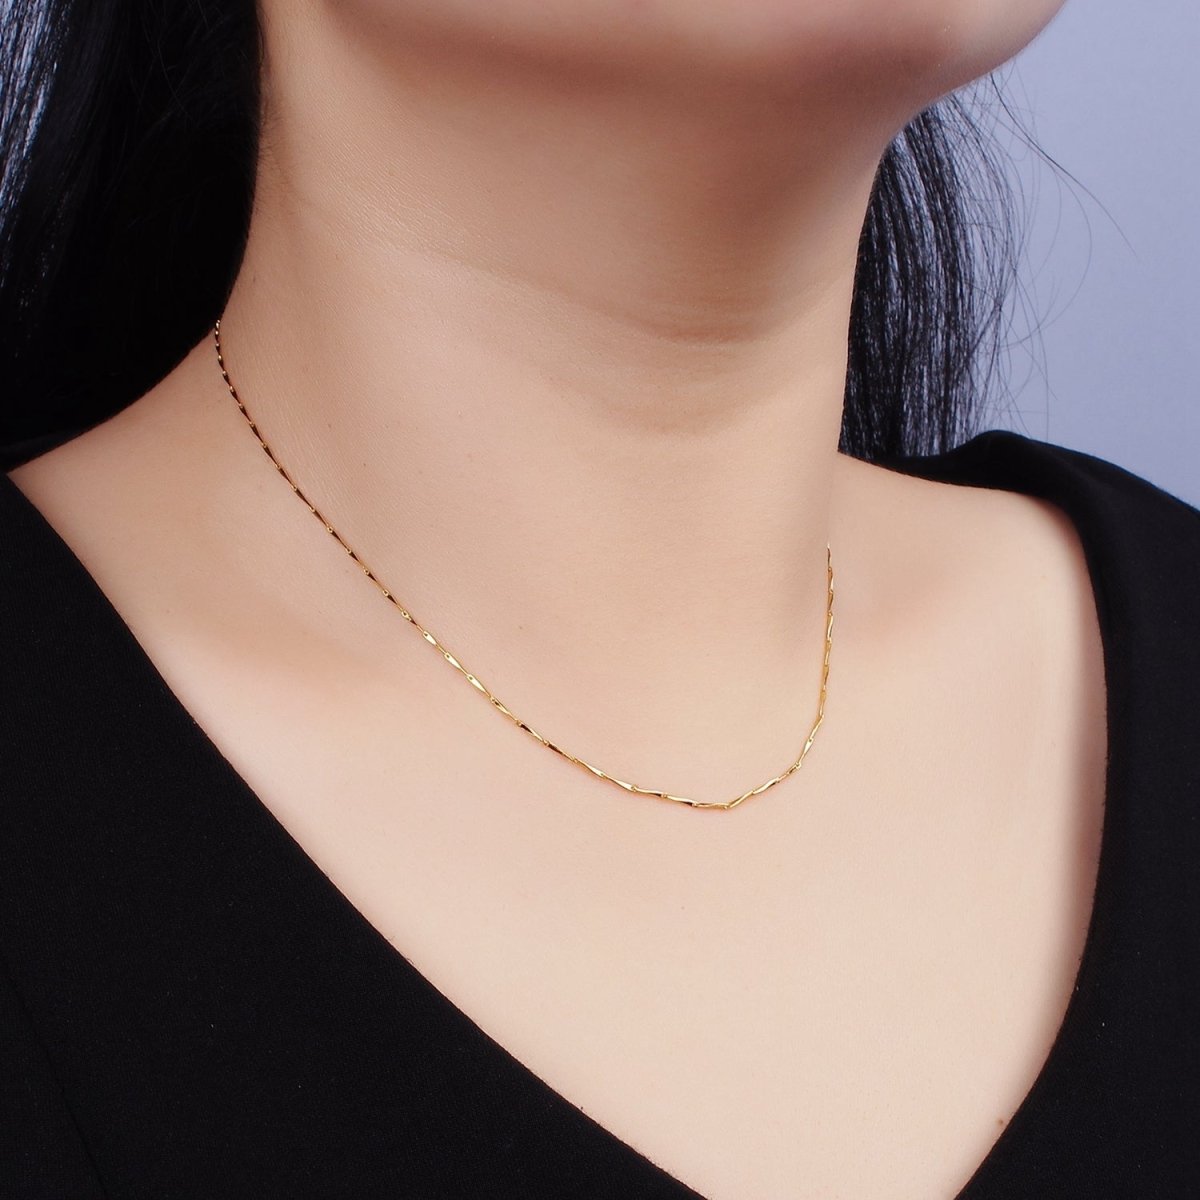 16K Gold Vermeil S925 Sterling Silver 1mm Dainty Horseshoe Barleycorn Unique 16 Inch Chain Necklace | WA-1958 Clearance Pricing - DLUXCA